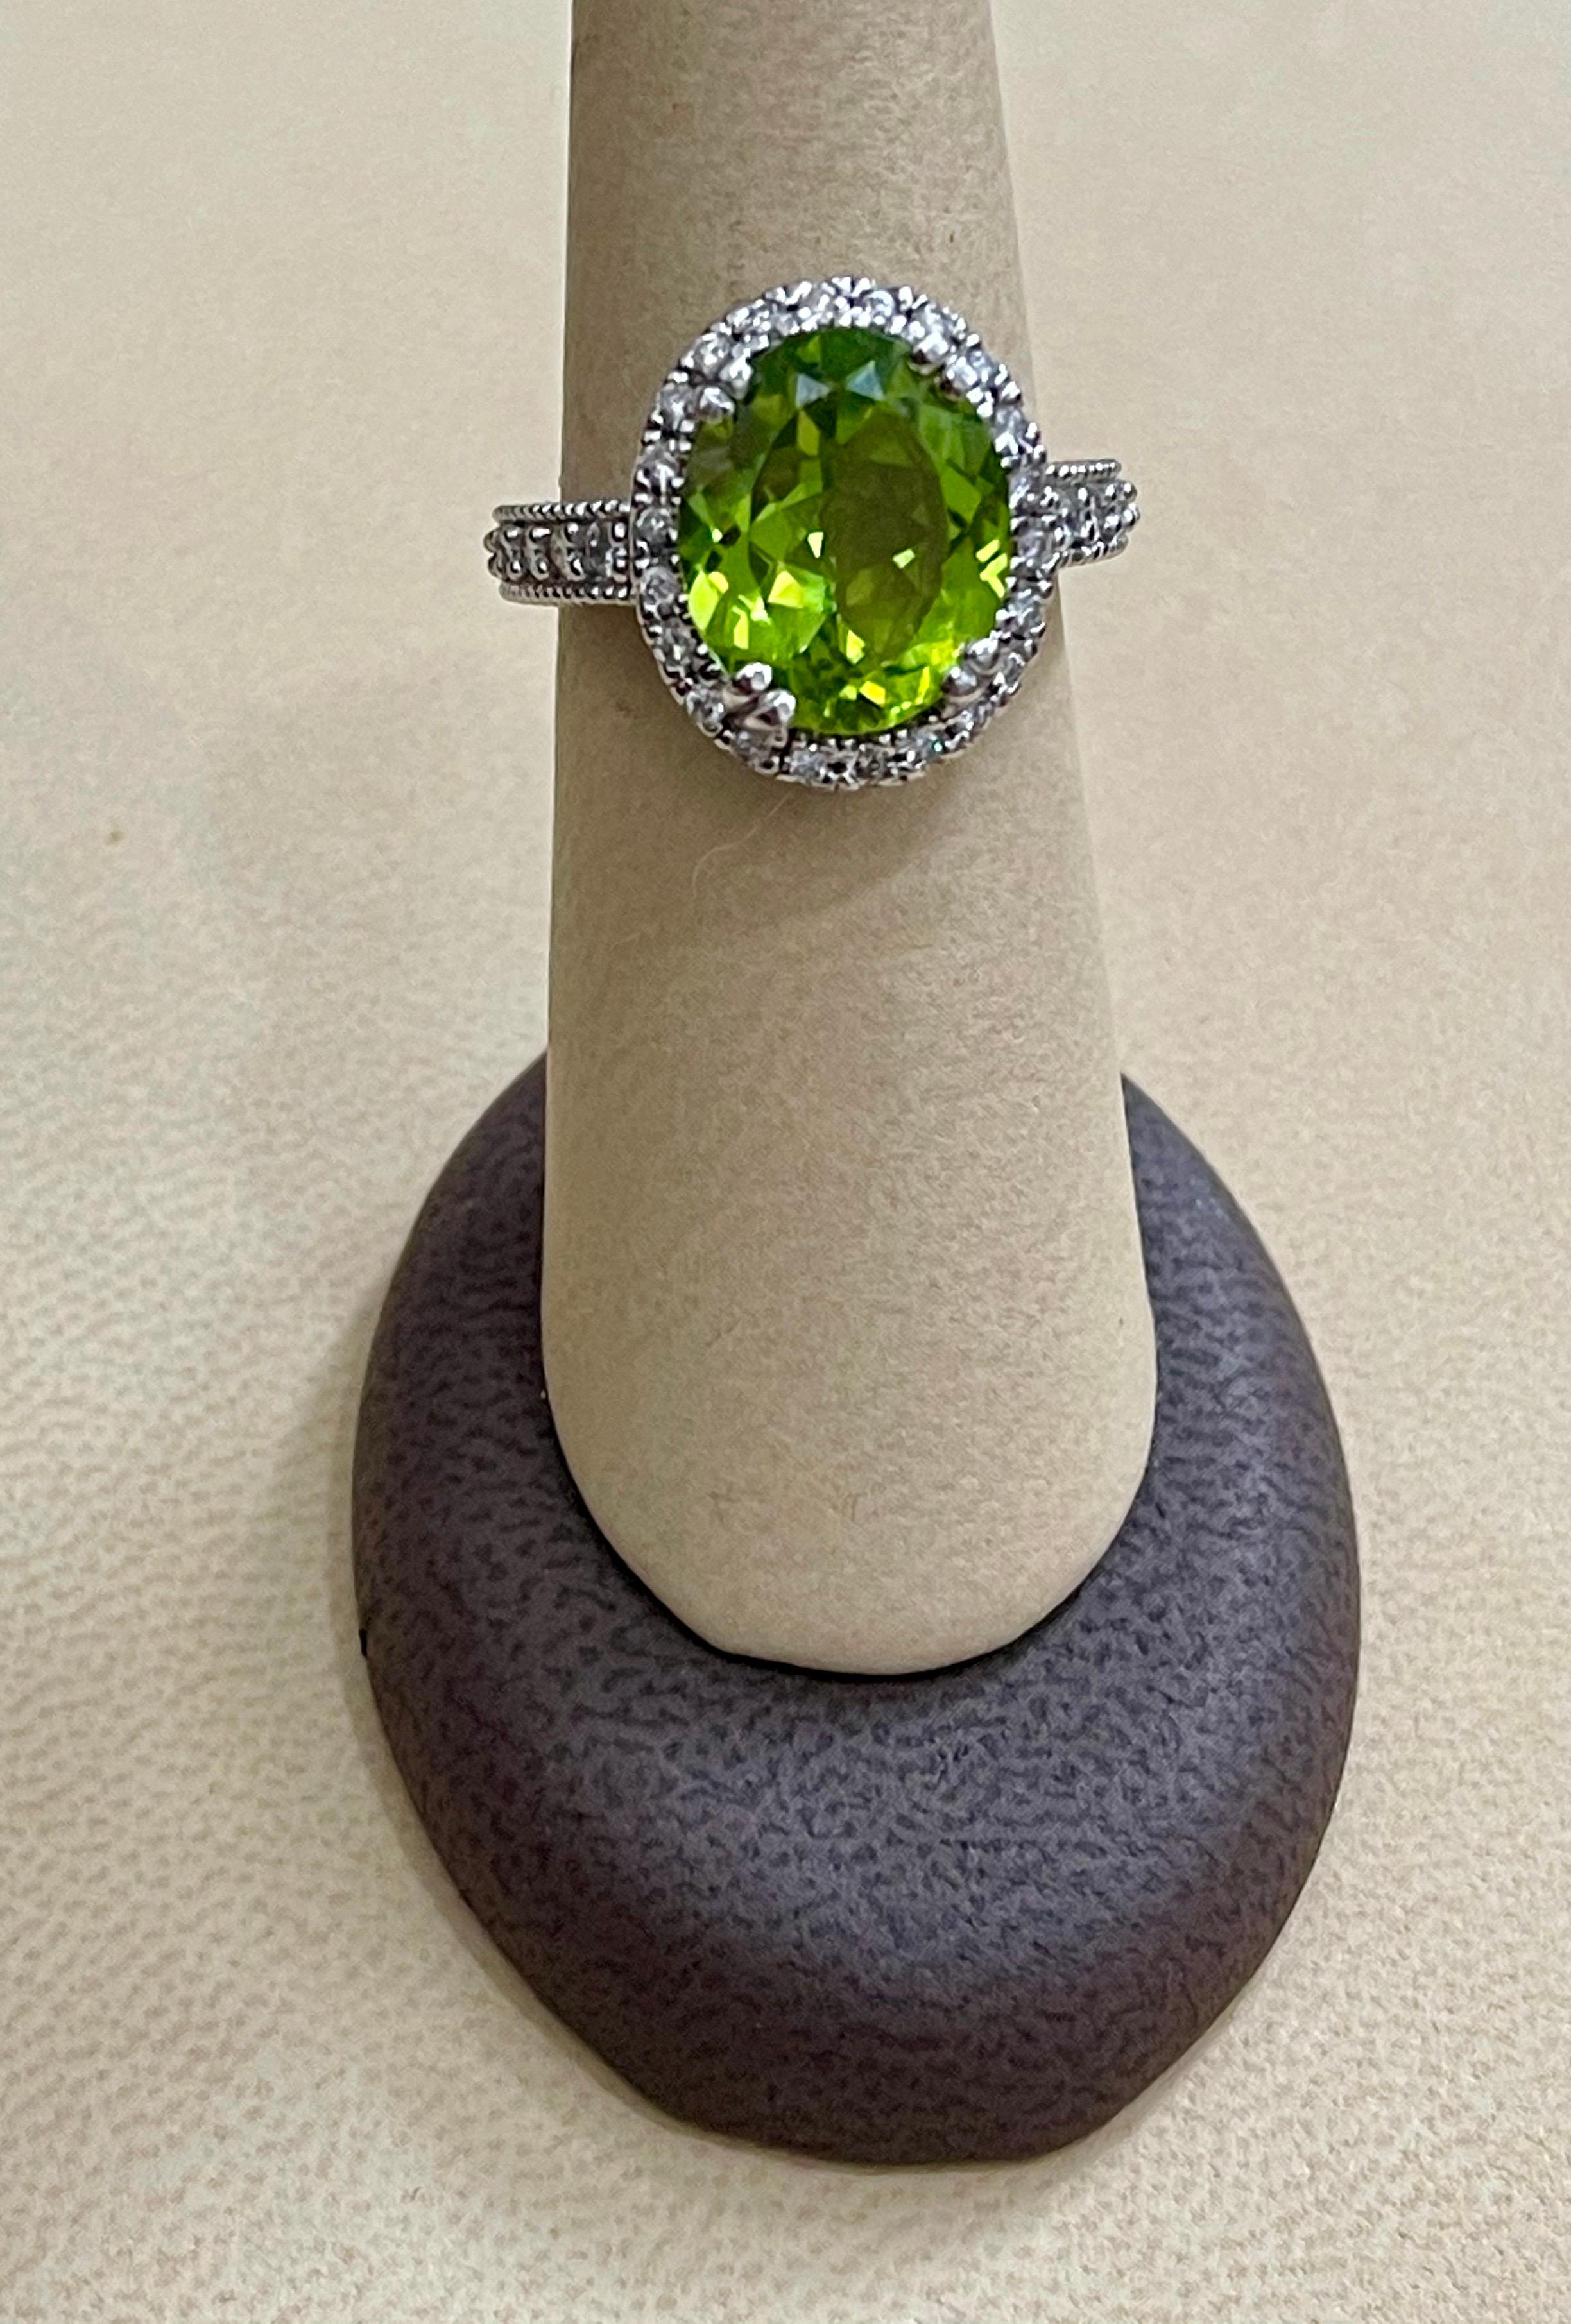 Women's 7 Carat Oval Peridot and 1.2 Carat Diamonds 14 Karat White Gold Cocktail Ring For Sale